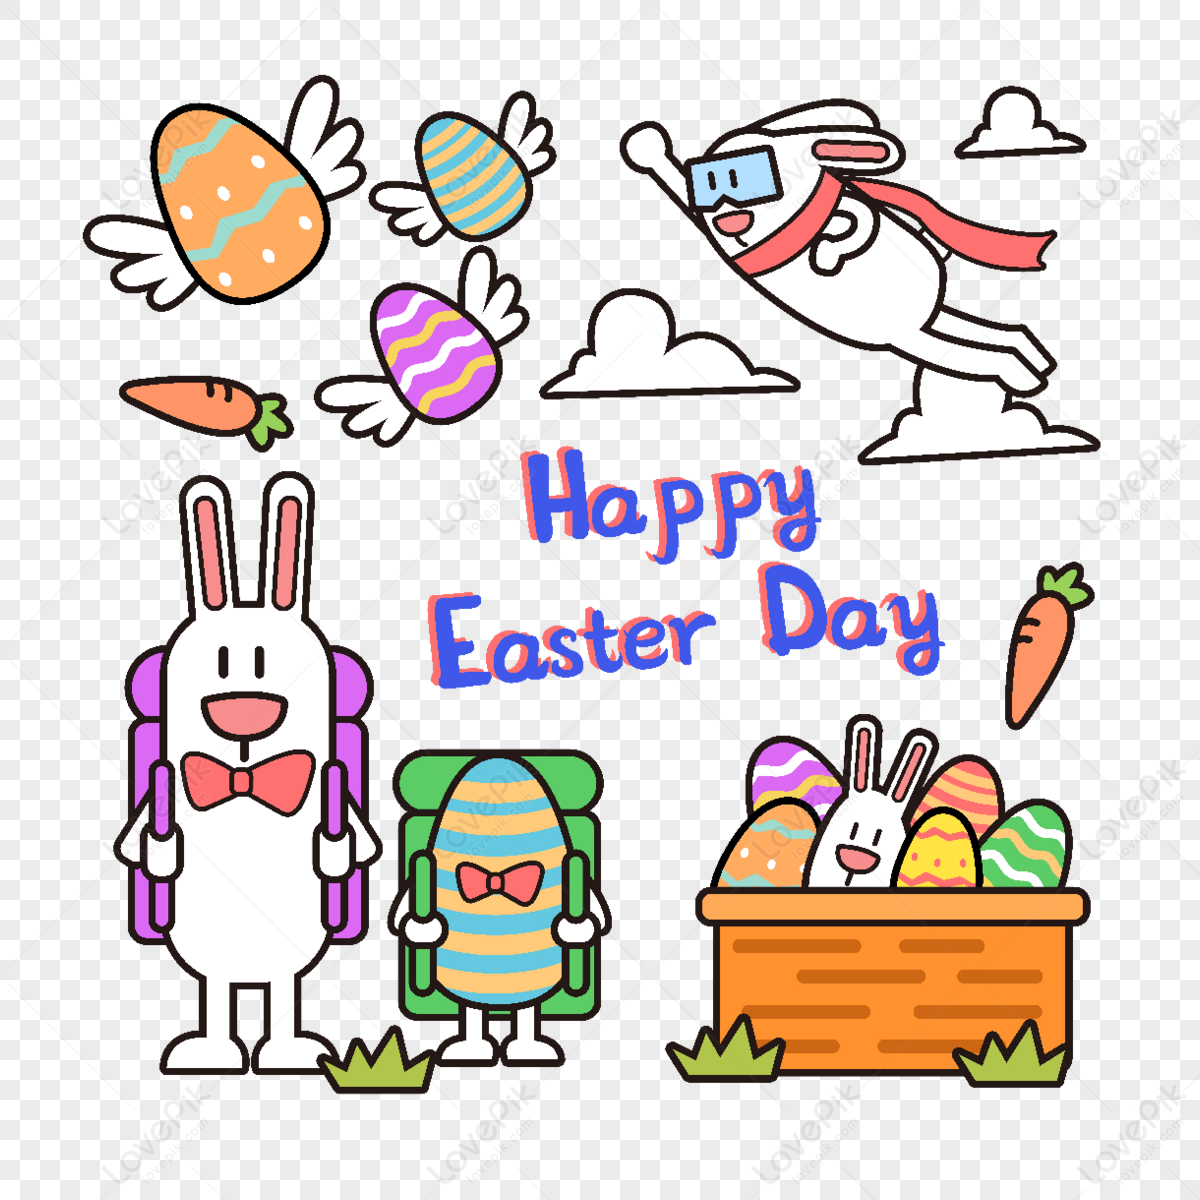 Easter bunny and eggs go on a trip,rabbit,wings png transparent background